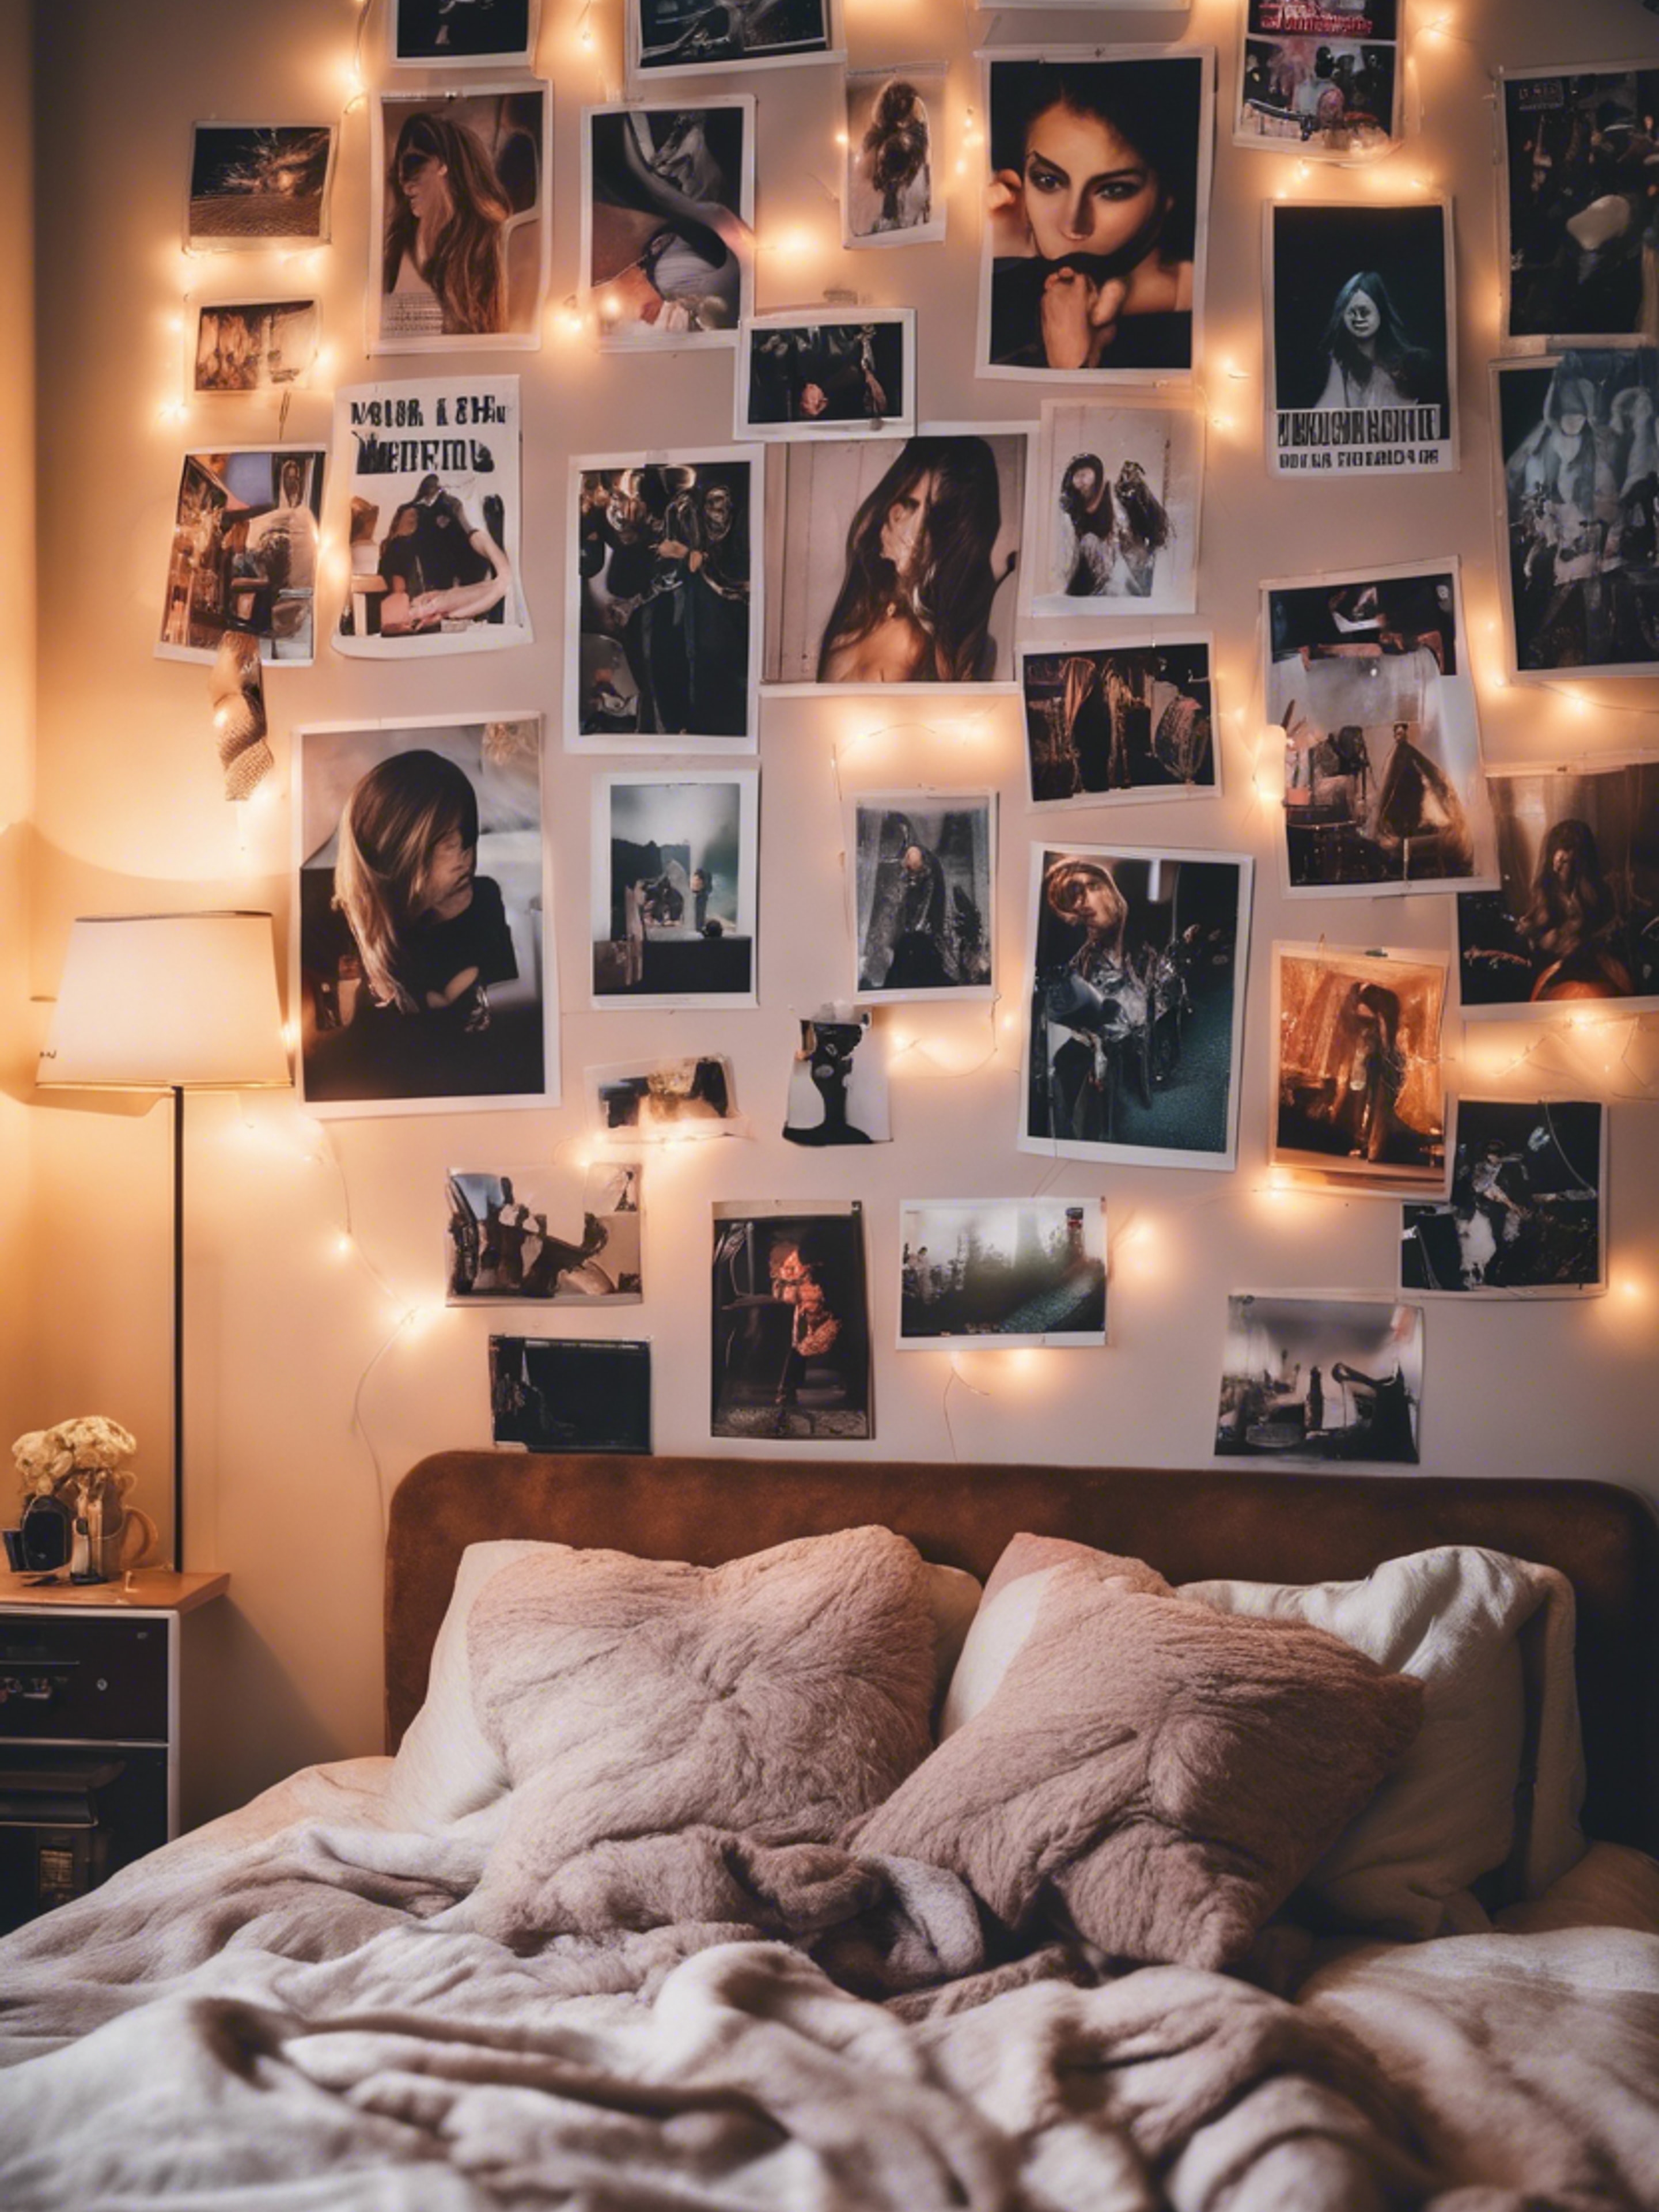 A modern and stylish teenage girl's room decorated with band posters, fairy lights, and polaroid pictures. Tapeta[8dbab99d18ae495d873b]